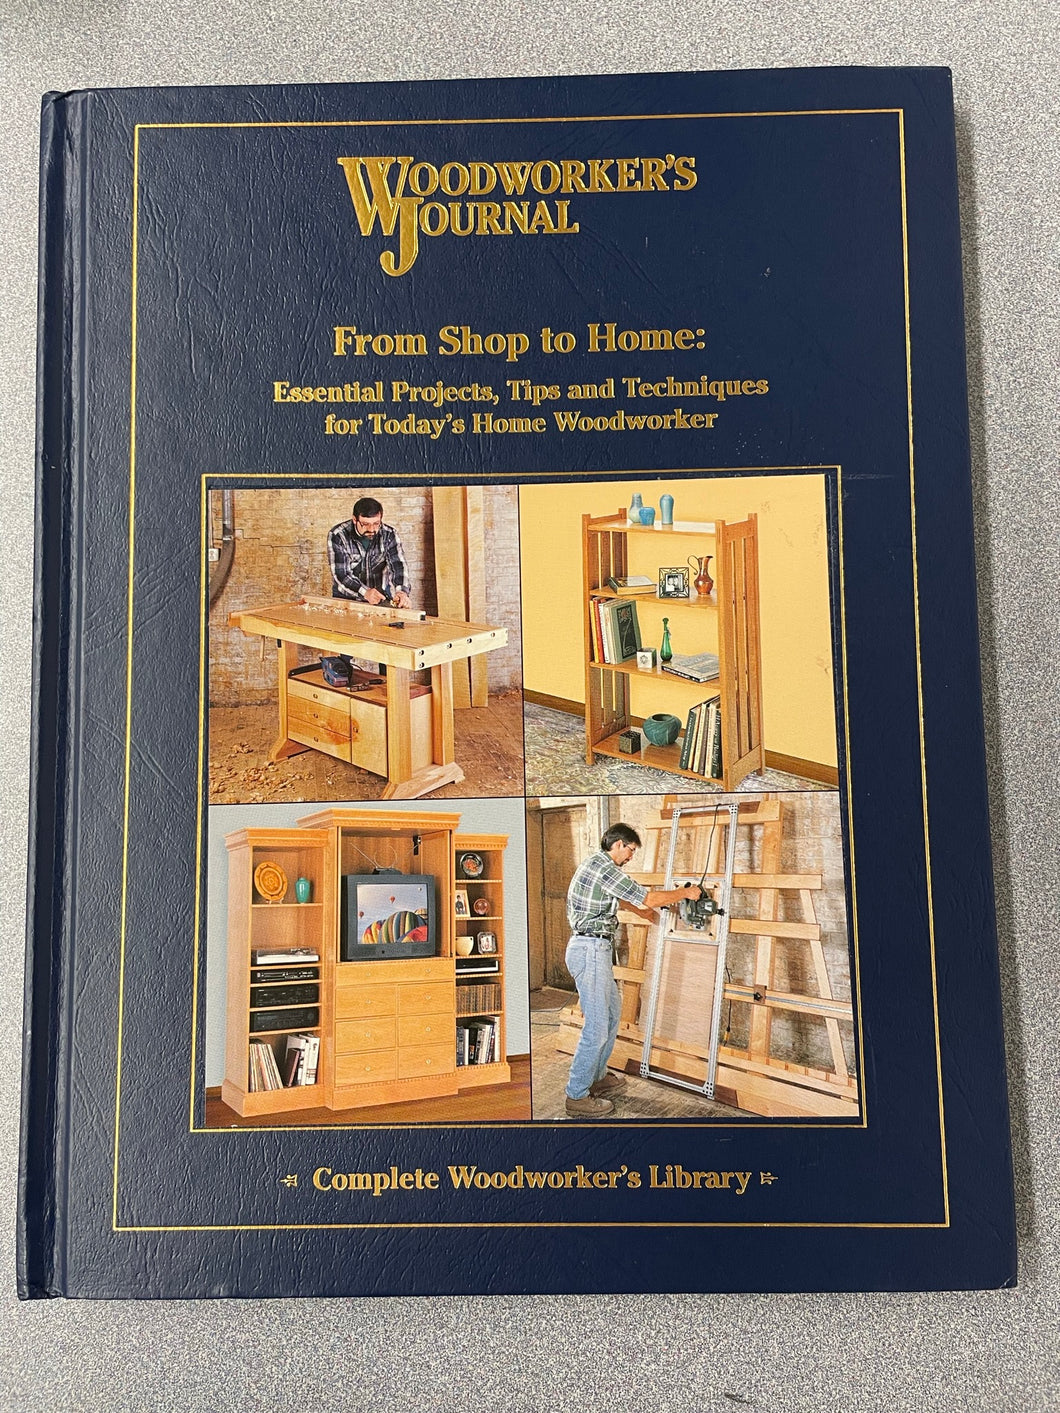 Woodworker's Journal: From Shop to Home: Essential Projects, Tips and Techniques for Today's Home Woodworker, Stoiaken, Larry N. Ed [2004] CG 12/22